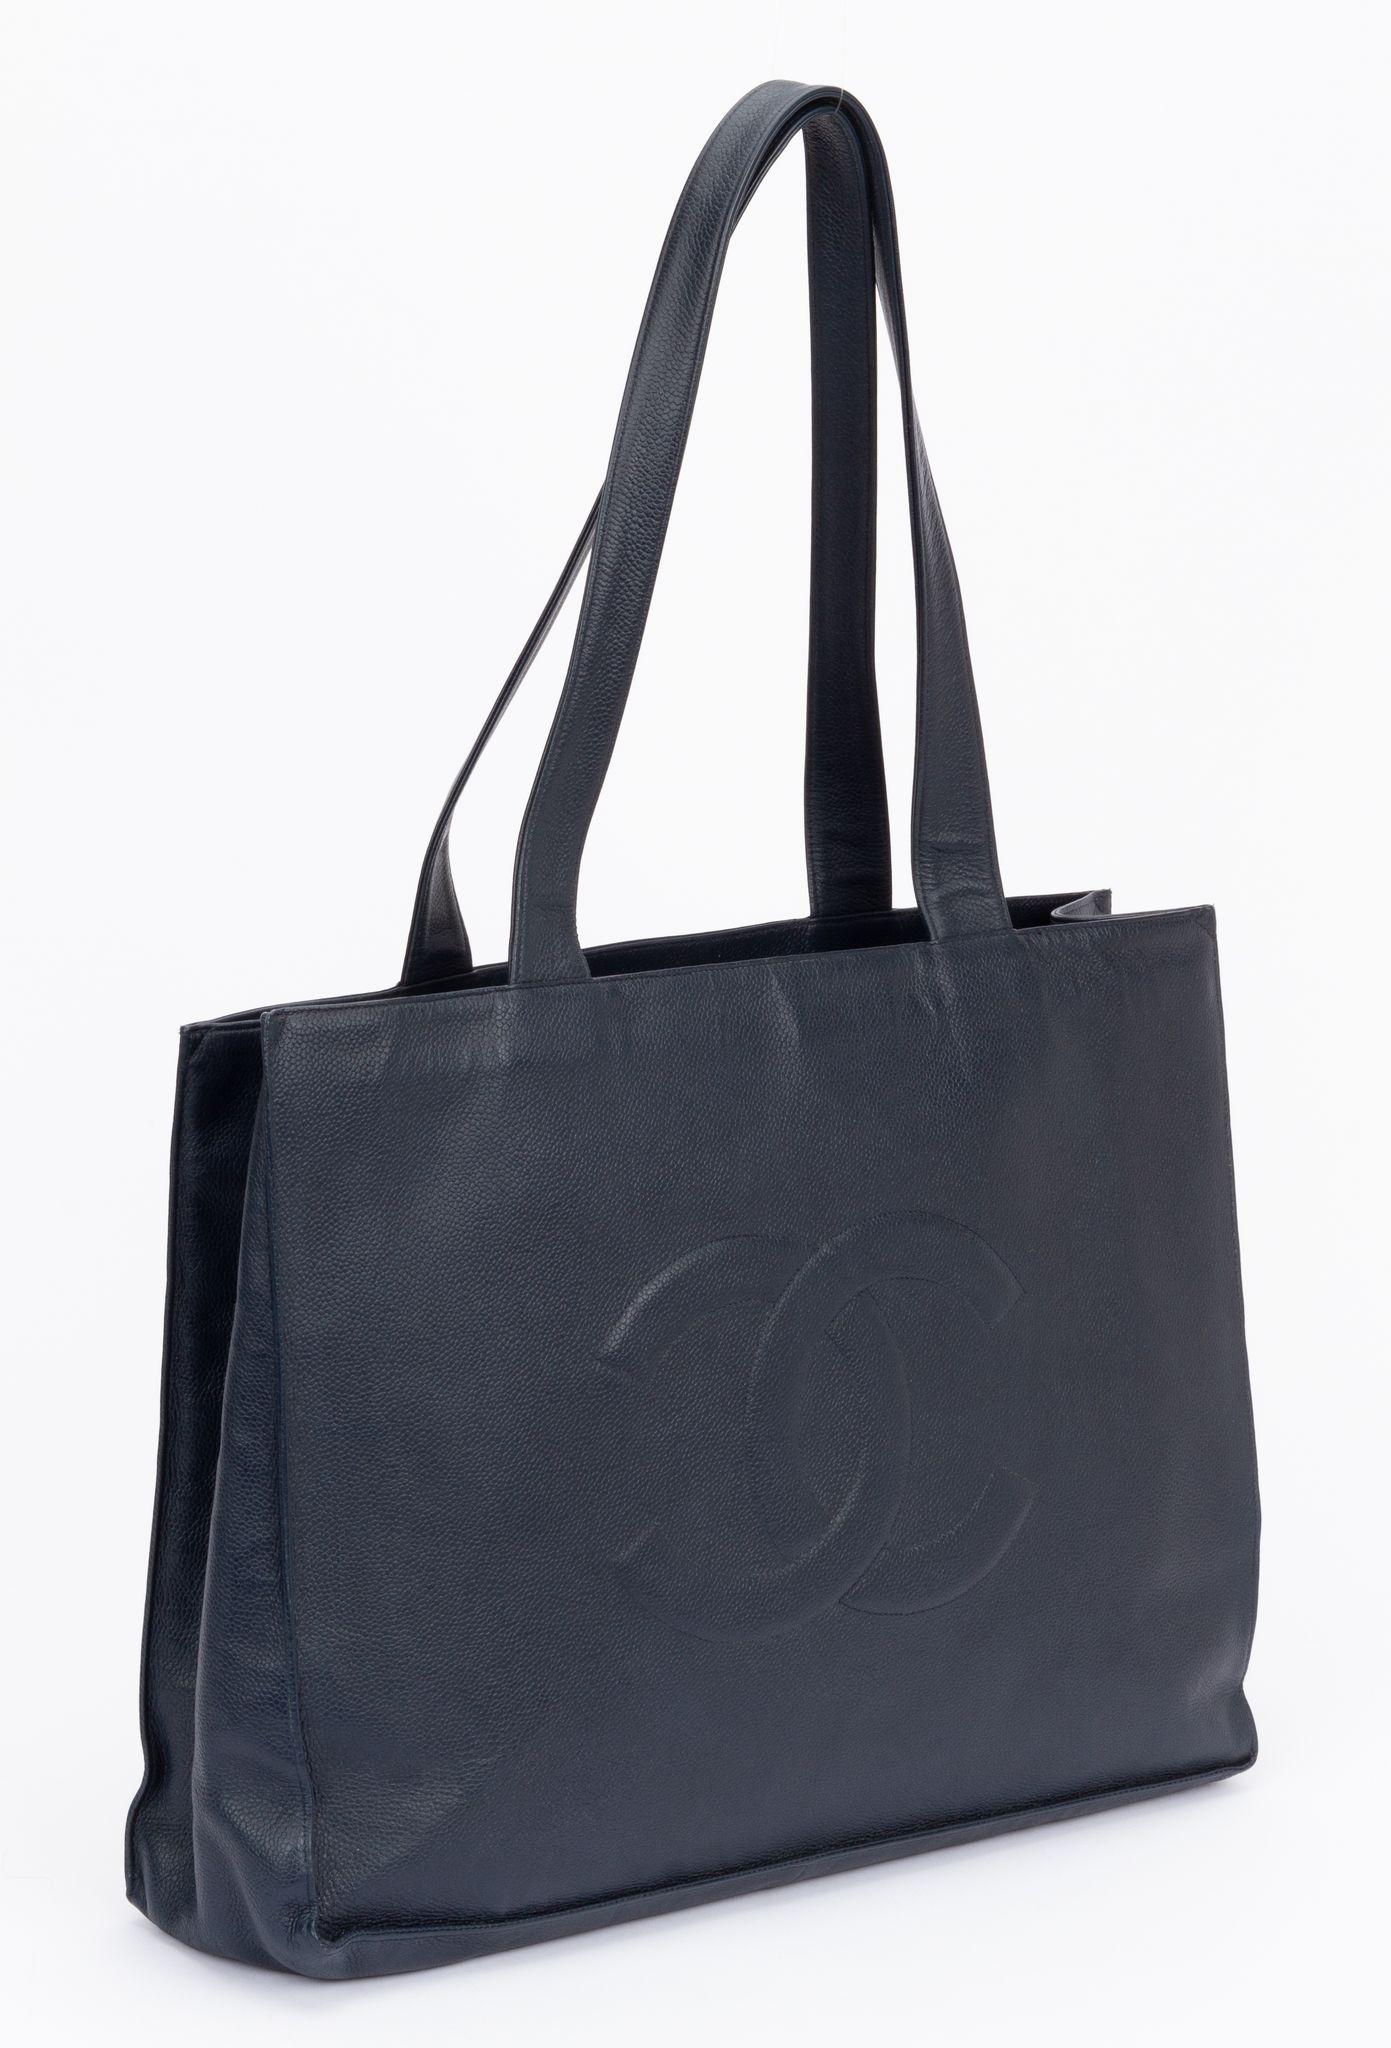 Chanel CC tote bag from the years 1998-2000. The interlocking CC motif has been a key cornerstone in collections for years. Made of navy caviar this tote bag is detailed with an embossed iteration of the signature logo. The handles have a drop of